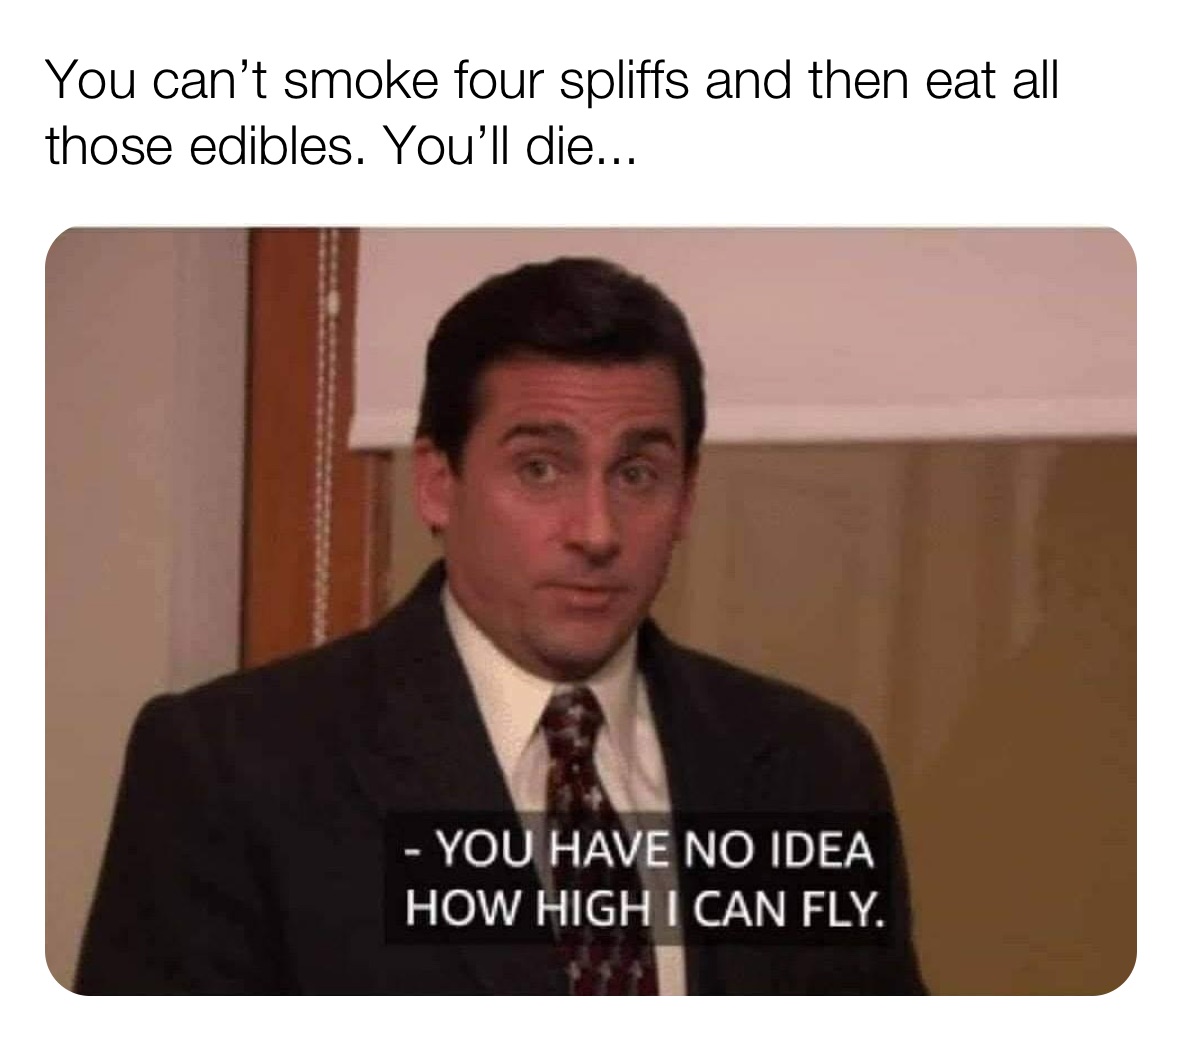 You can’t smoke four spliffs and then eat all those edibles. You’ll die...